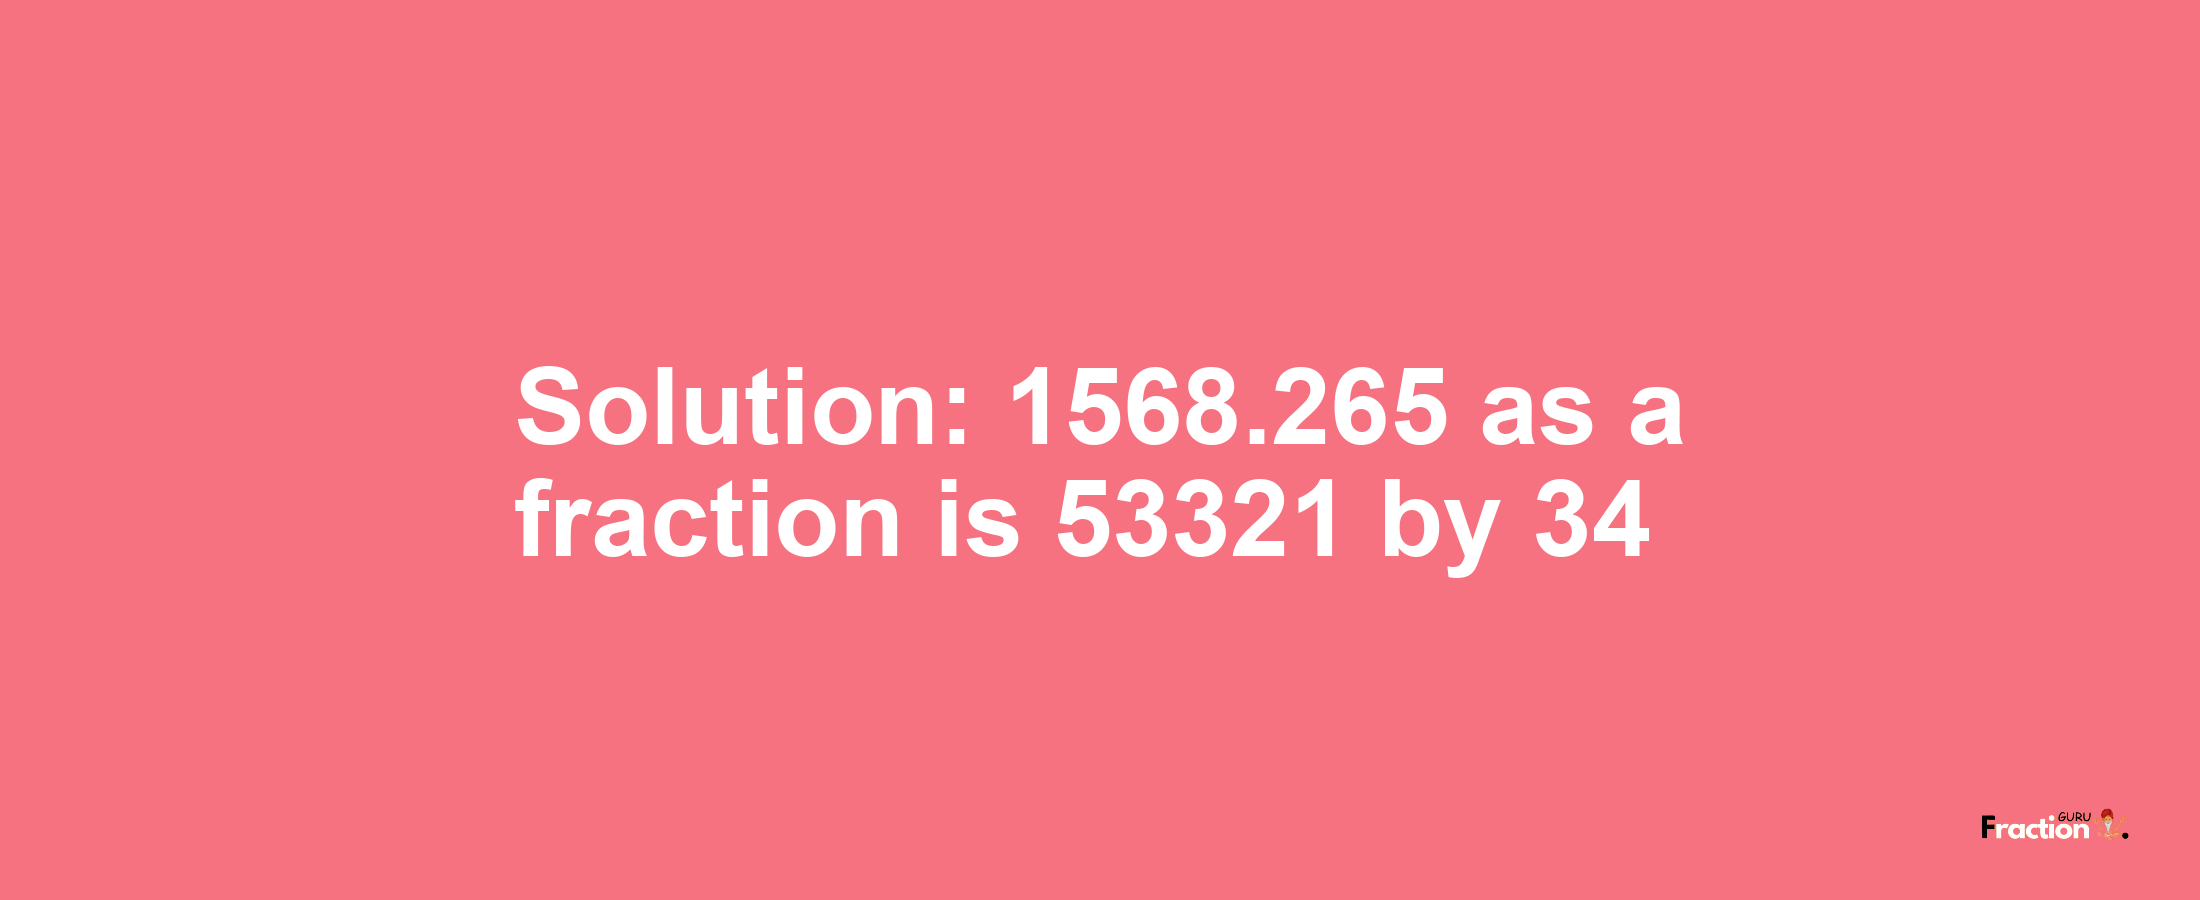 Solution:1568.265 as a fraction is 53321/34